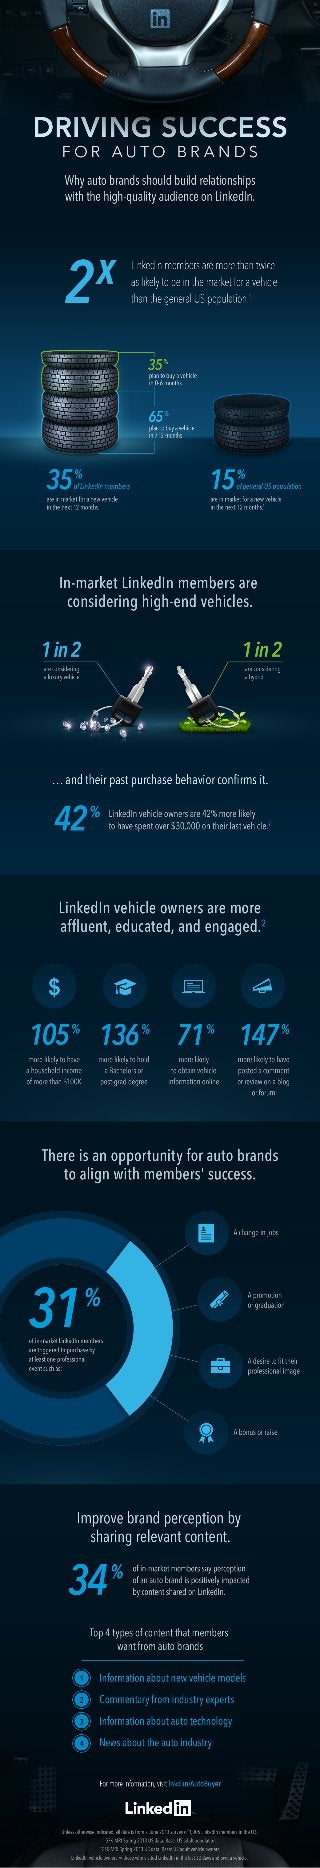 Driving Success for Auto Brands on LinkedIn [INFOGRAPHIC]